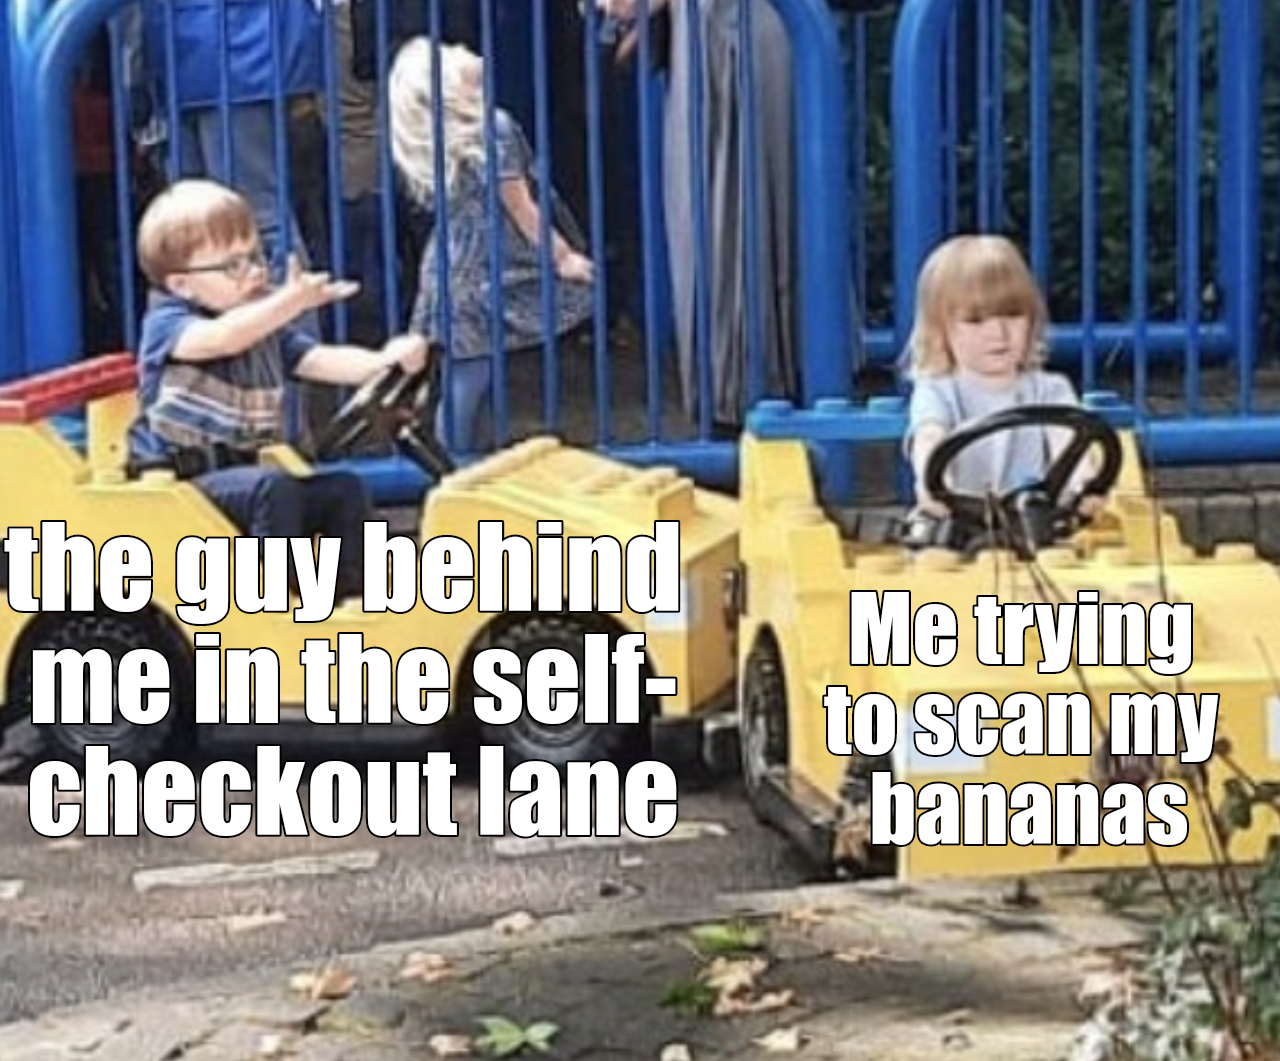 dank memes - funny memes - play - the guy behind me in the self checkout lane Me trying to scan my bananas